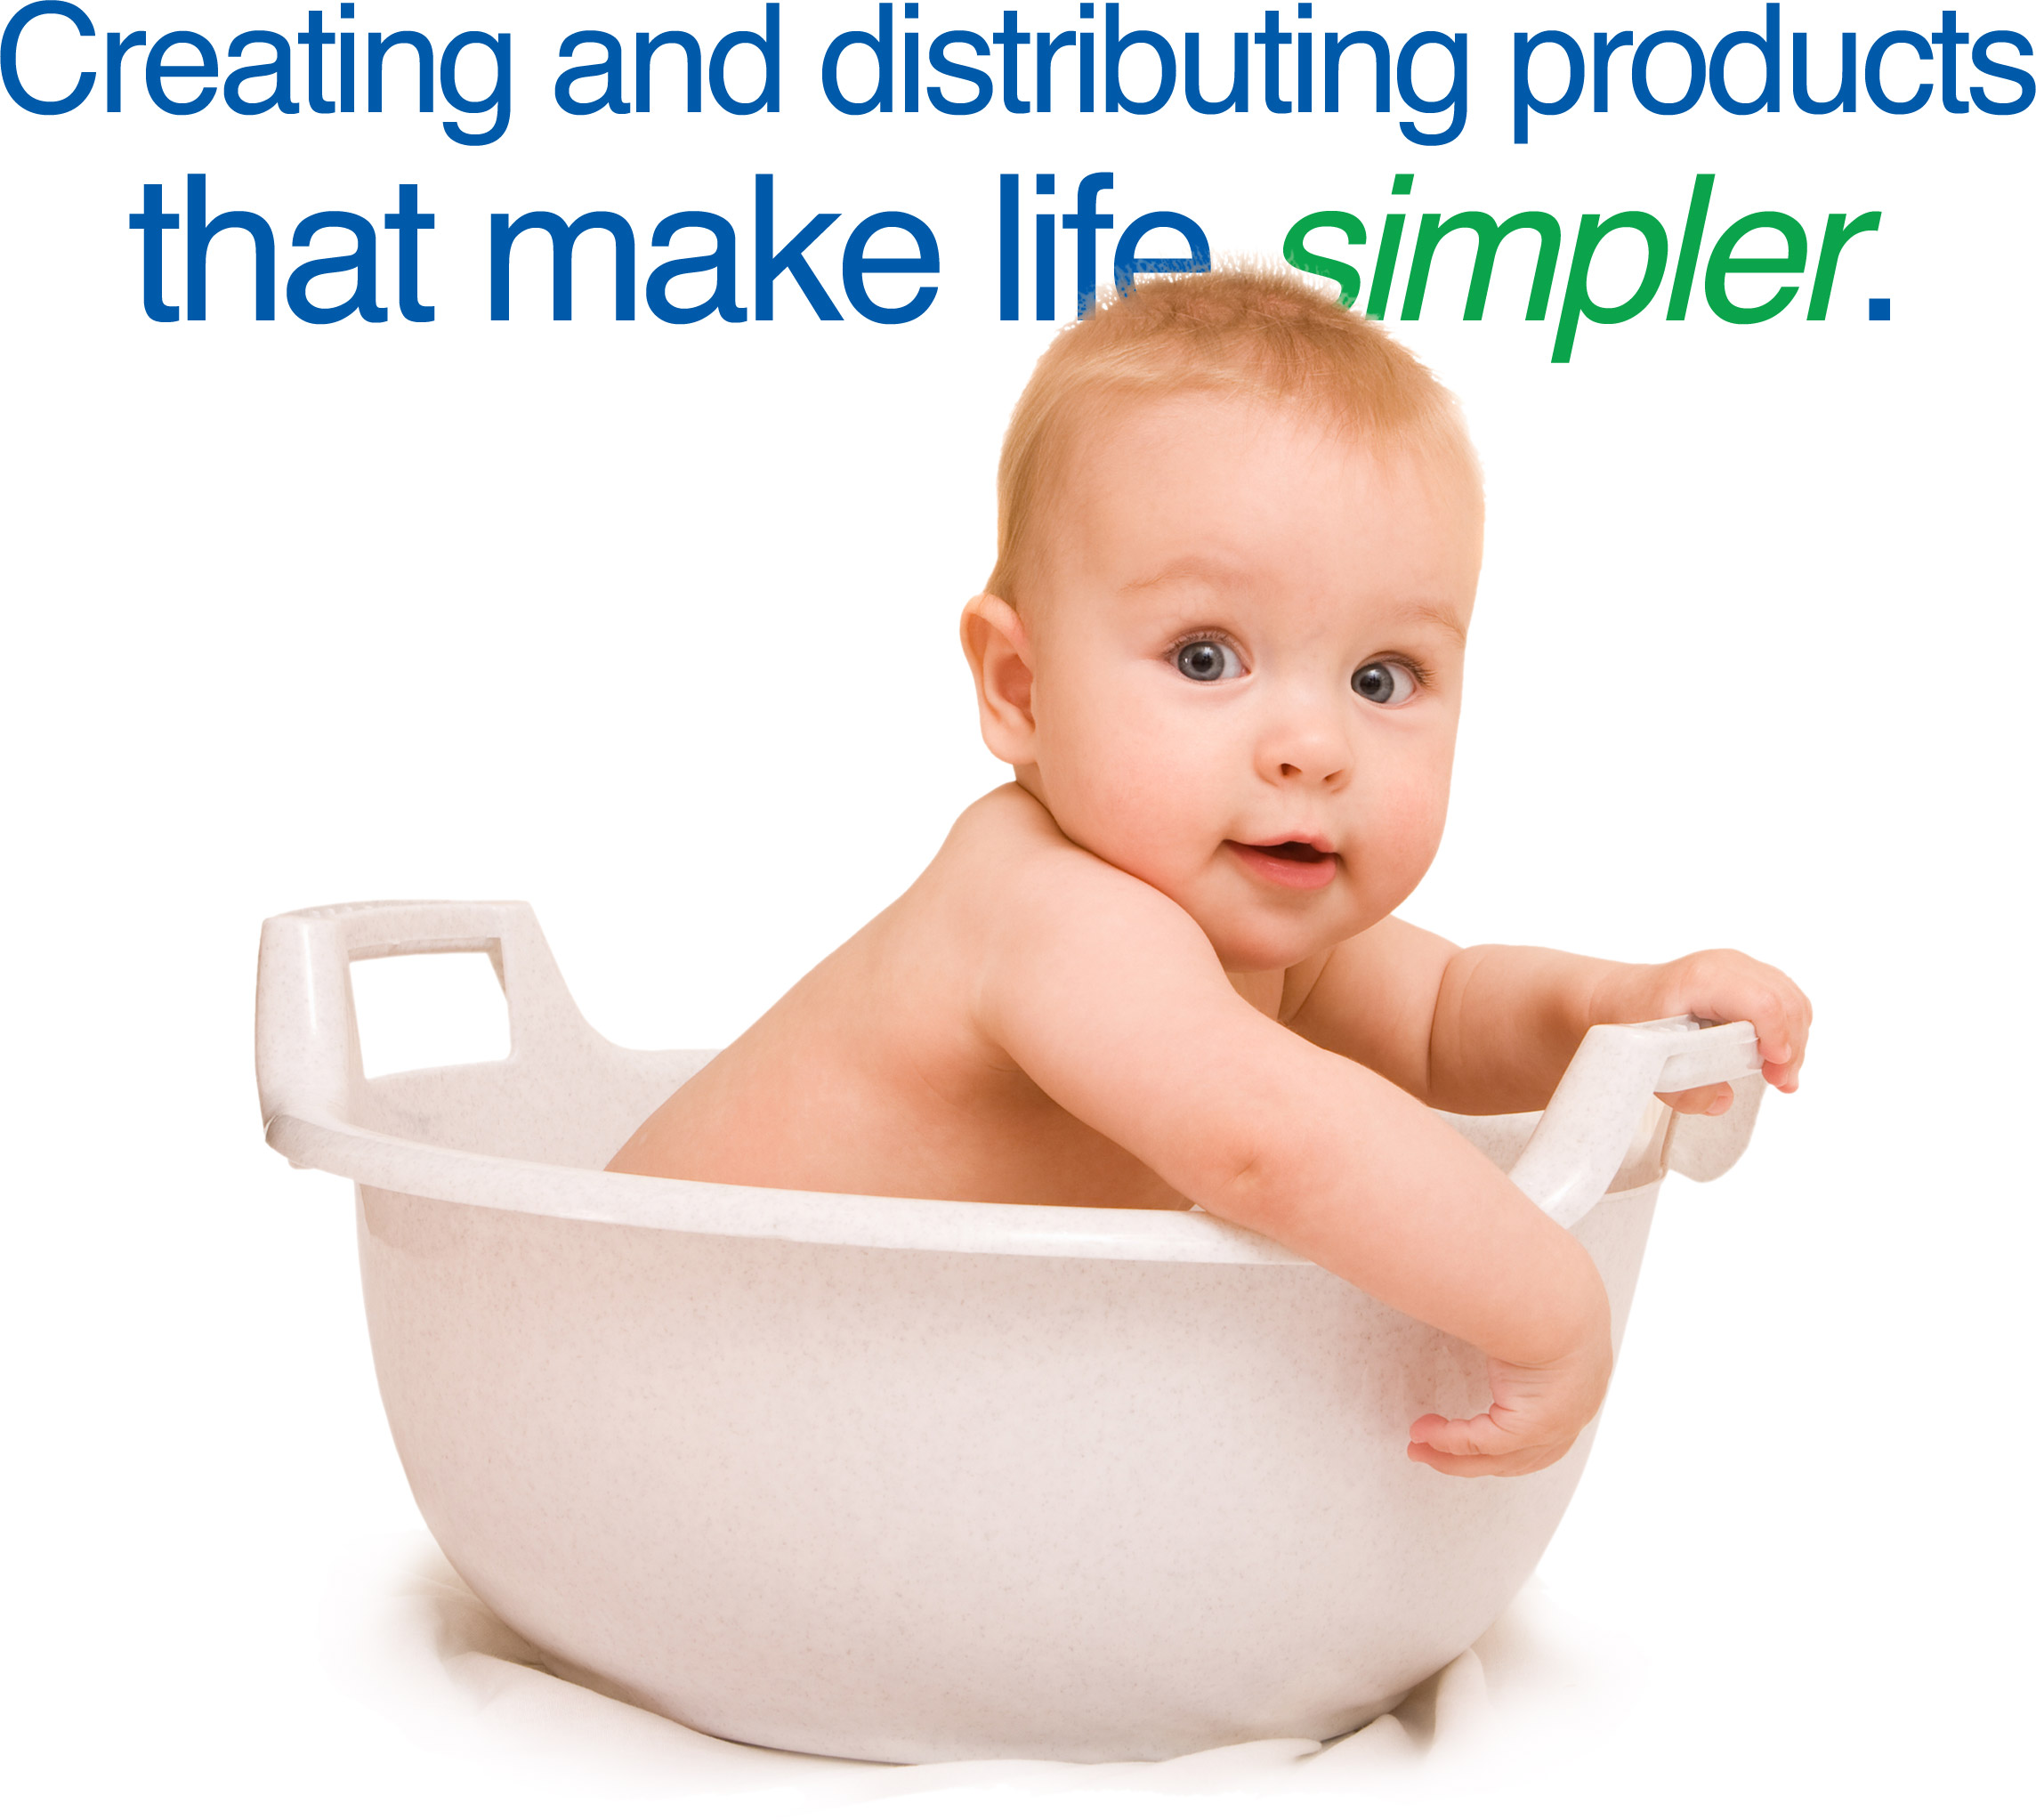 Creating and distributing products that make life simpler.